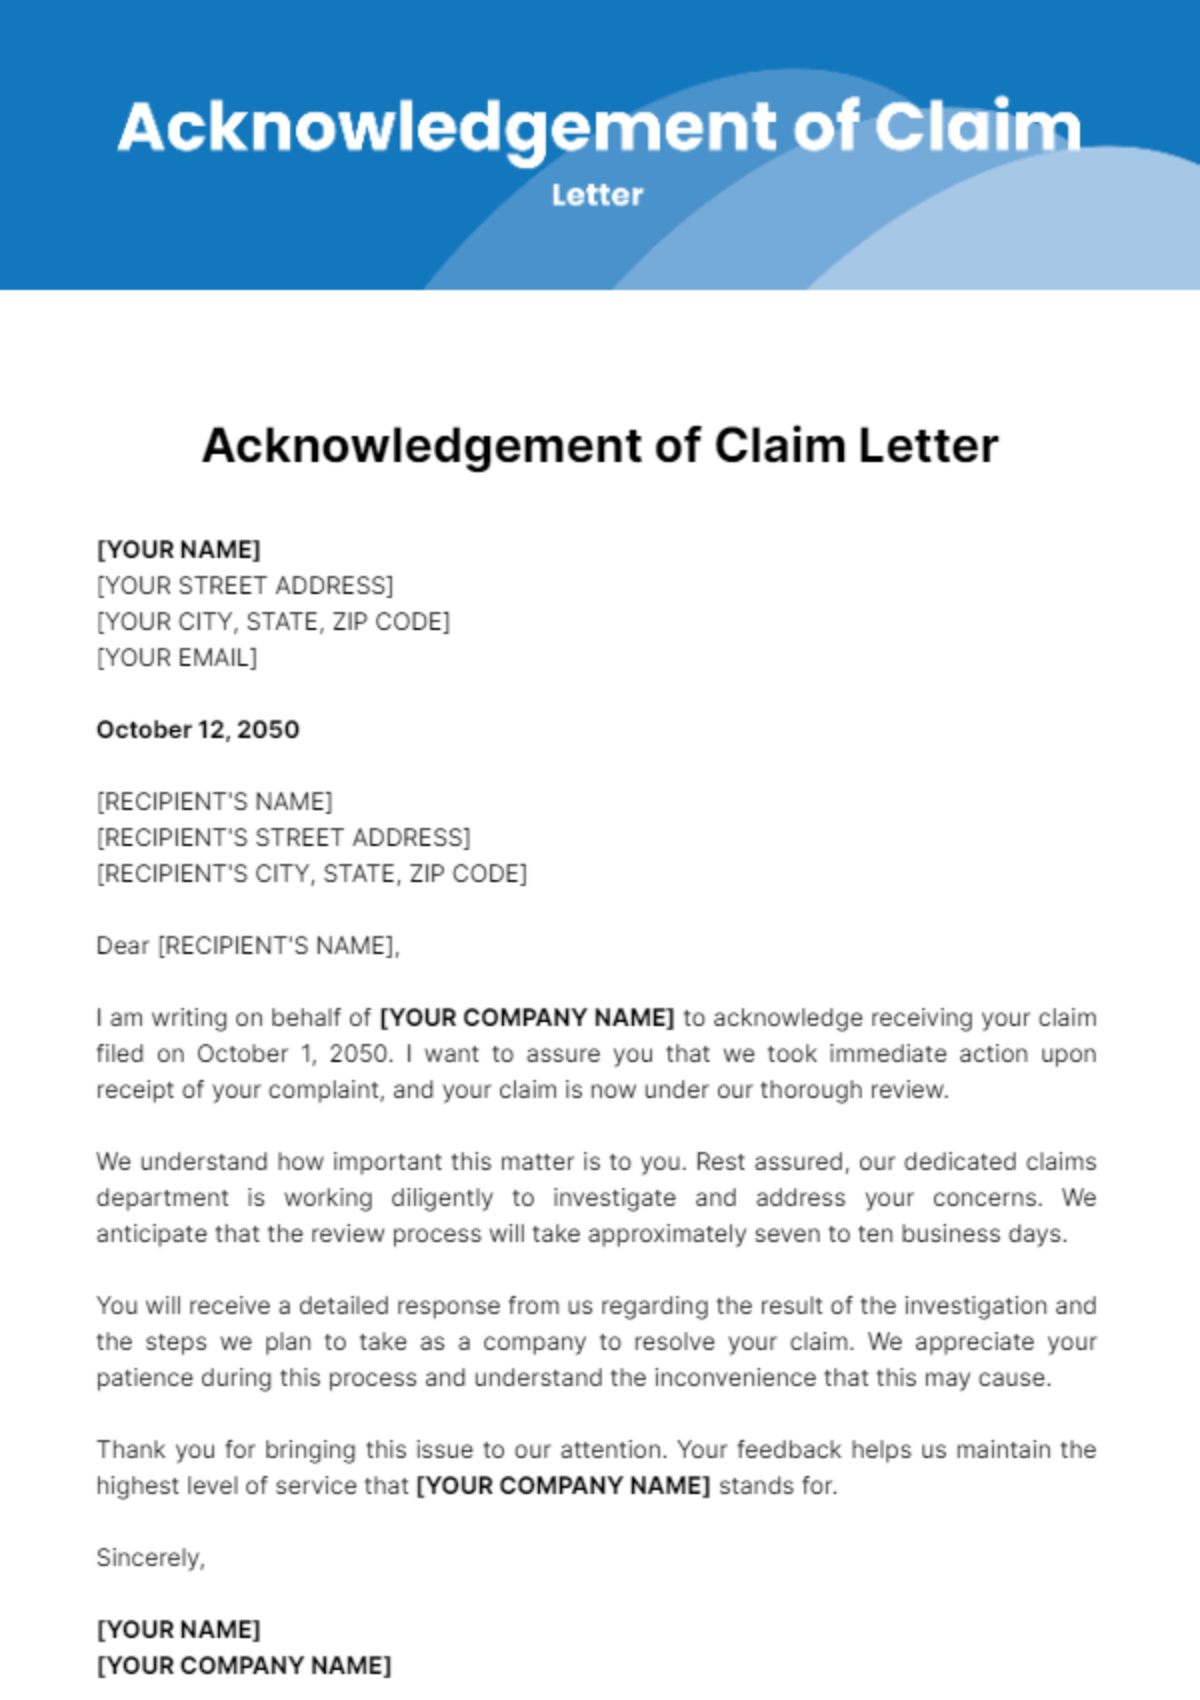 Free Acknowledgement of Claim Letter Template